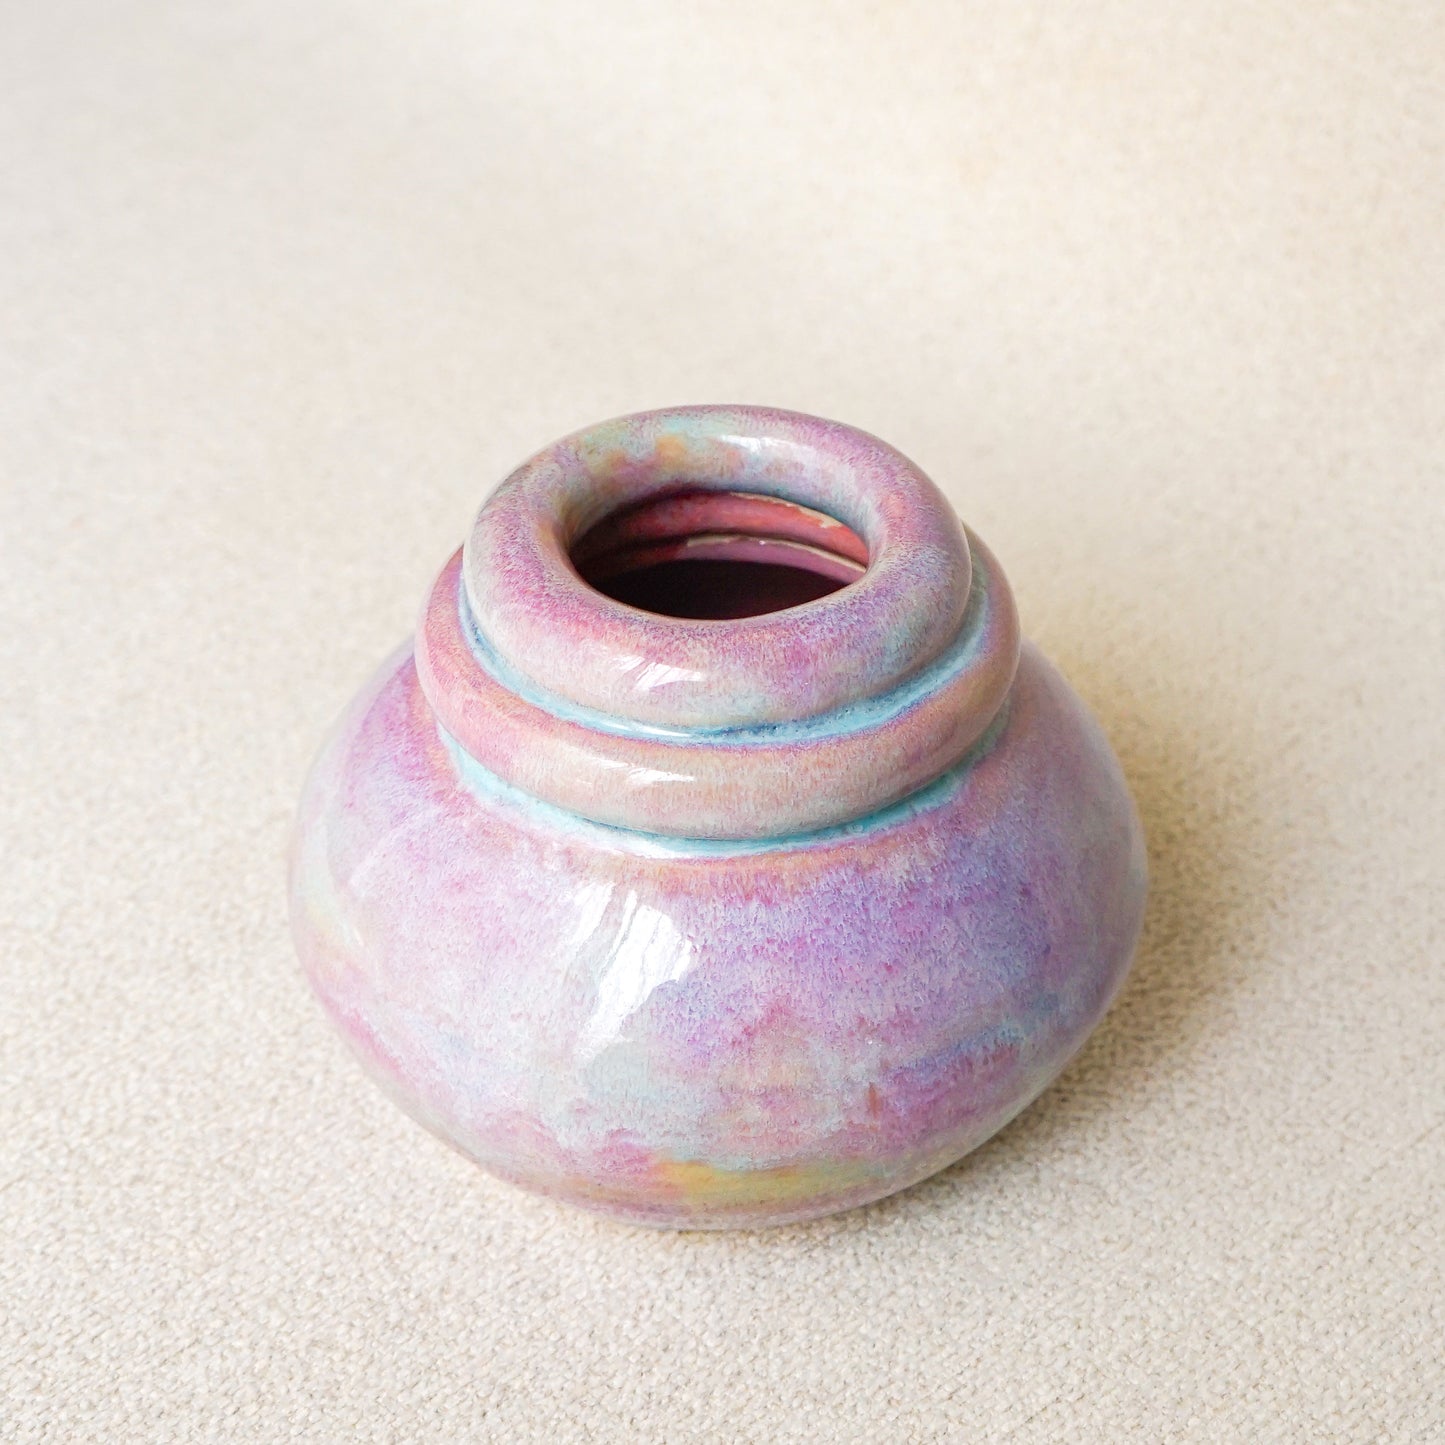 The Cotton Candy Coil Vase